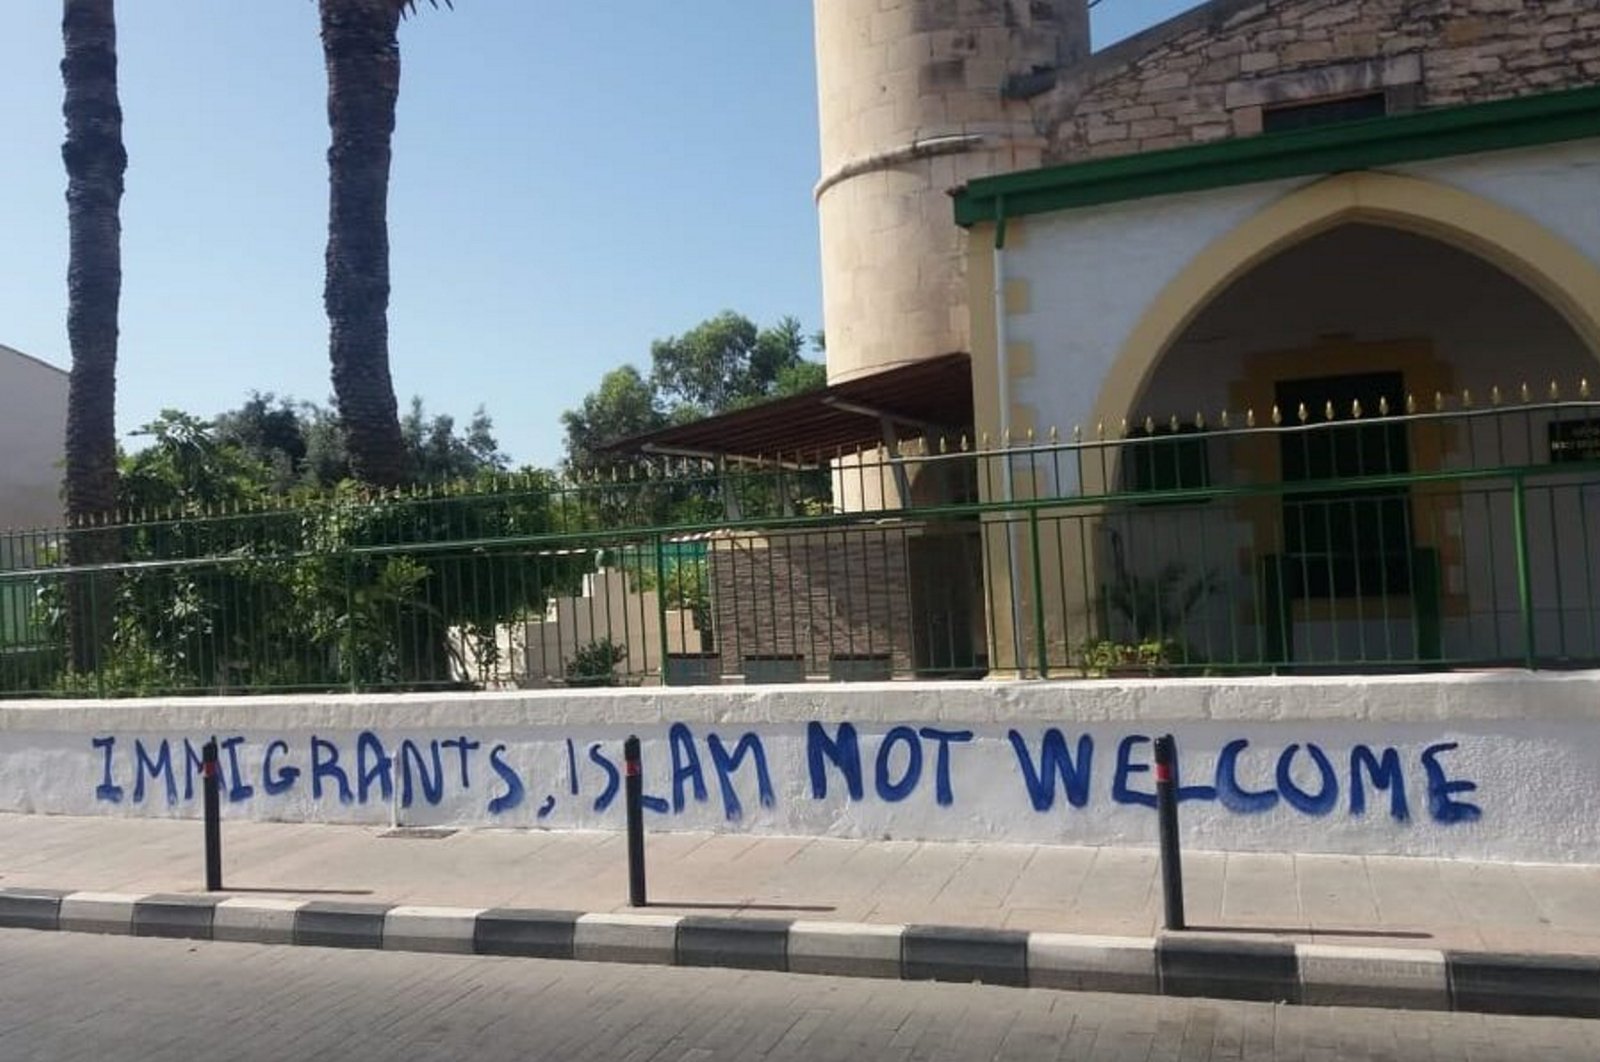 The garden wall of the Köprülü Hacı Ibrahim Ağa Mosque reads &quot;Immigrants, Islam not welcome&quot; in spray paint after a perpetrator attacked the mosque, Limassol, Greek Cypriot administration, Aug. 26, 2023. (AA Photo)